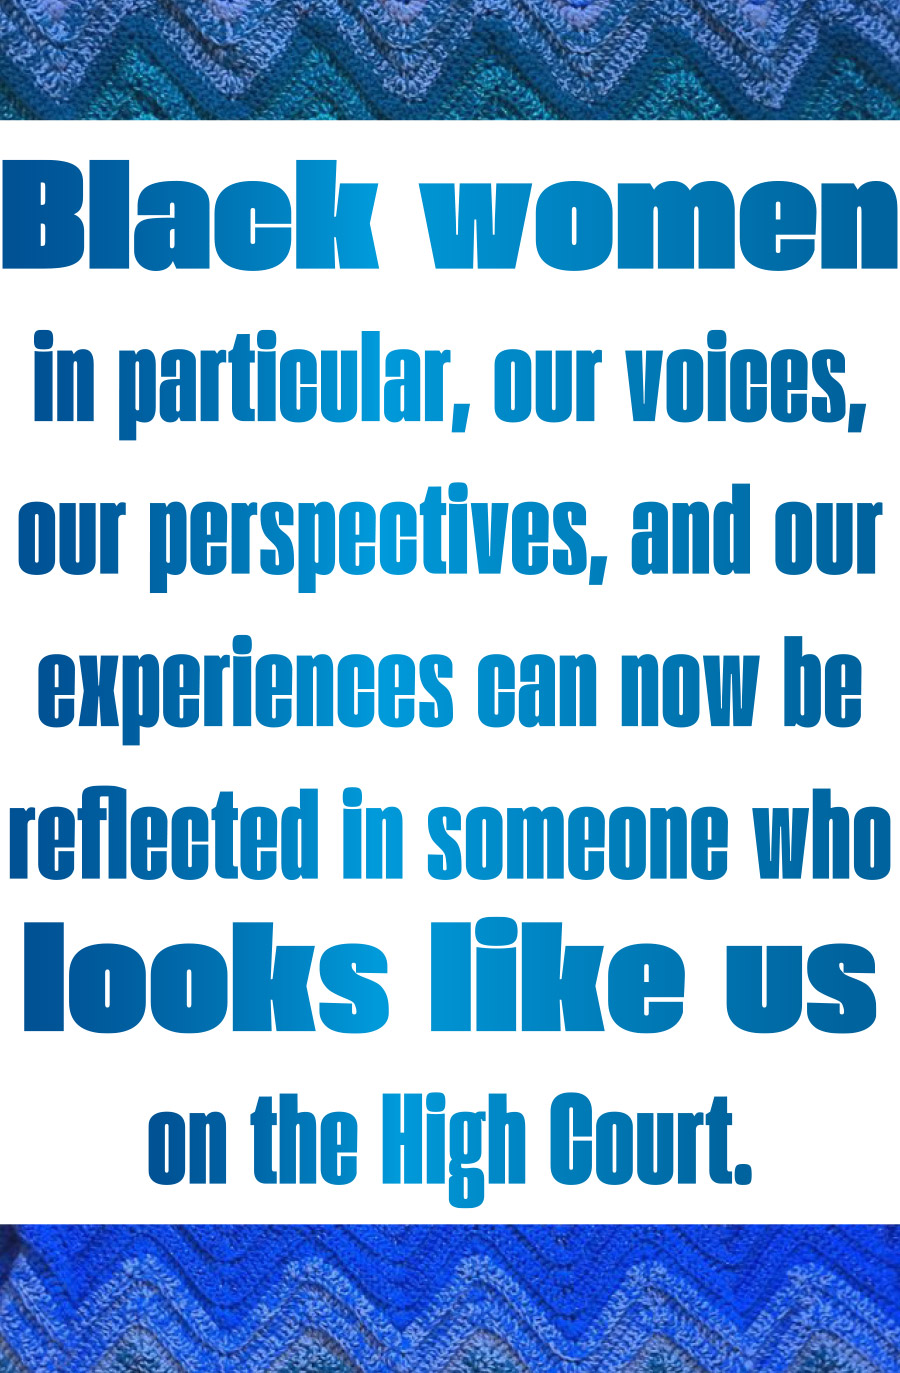 Black women in particular, our voices, our perspectives, and our experiences can now be reflected in someone who looks like us on the High Court.